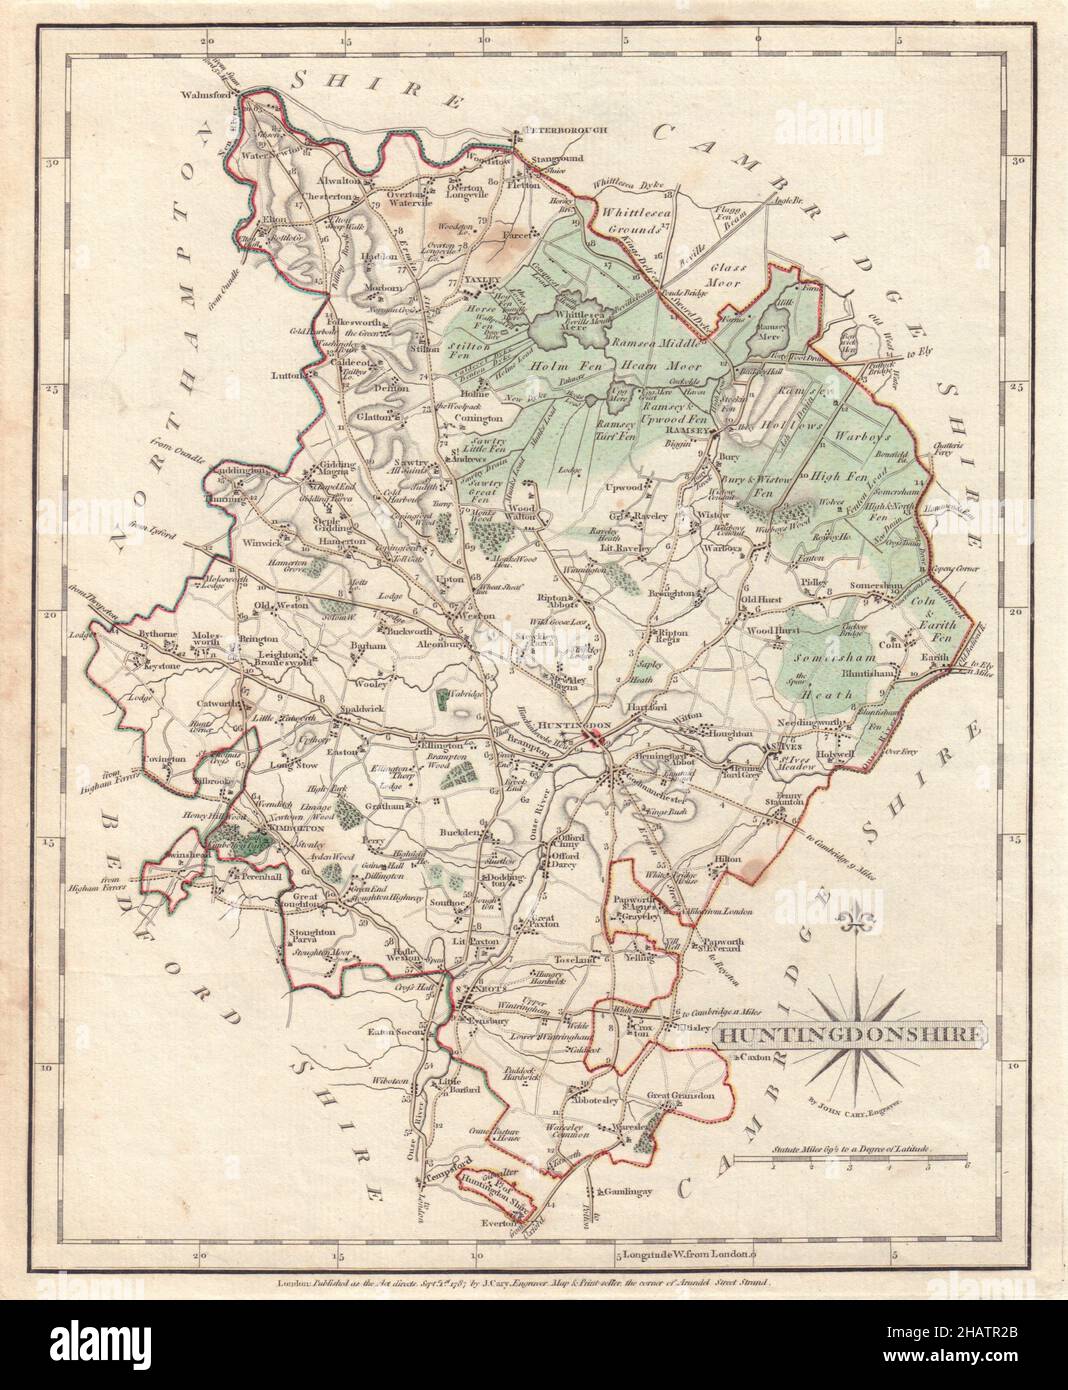 Antique county map of HUNTINGDONSHIRE by JOHN CARY. Original outline colour 1787 Stock Photo